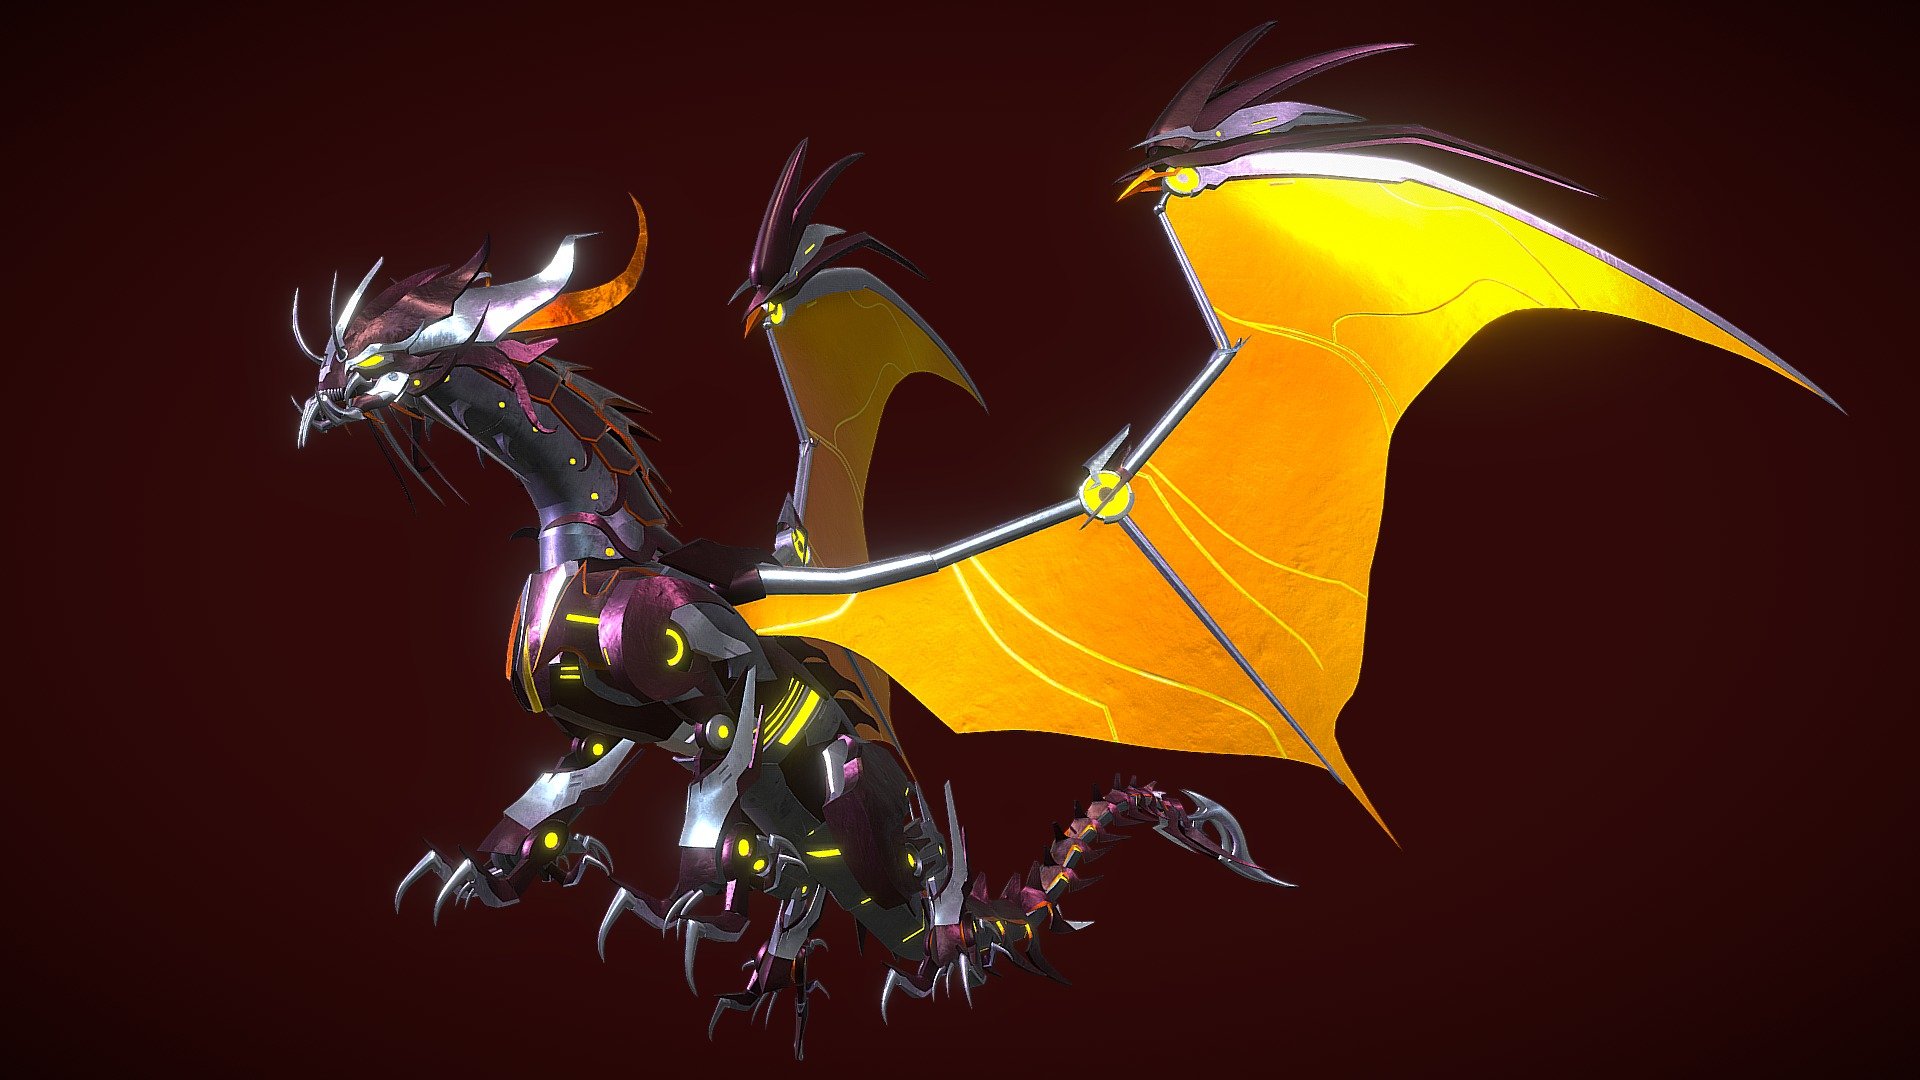 3D model rig of Predaking, a unique dragon Transformers from the Transformers Prime series. With rigging and PBR materials, ensuring appropriate usability for animations and games.

The native file type is BLEND as it was created with Blender, however with OBJ, FBX as well as PBR textures provided, it will work with any 3D programs.

All rights of the Transformers brand belongs to Hasbro.

&mdash;DETAILS&mdash;

In this package includes:





Blender file (.BLEND) with armature rigging, proper materials and PBR textures set up.




PBR textures in 4K, including these maps: Color, Metallic, Specular, Roughness, Emission.




OBJ and FBX files.



The model in Blender project file also completed with Crease edges and therefor, subdivision ready.

The model along with other Transformers Prime models were originally created for fan project: Transformers Prime Darkness Retreats.

Thank you for your support of my products and look out for more soon 3d model